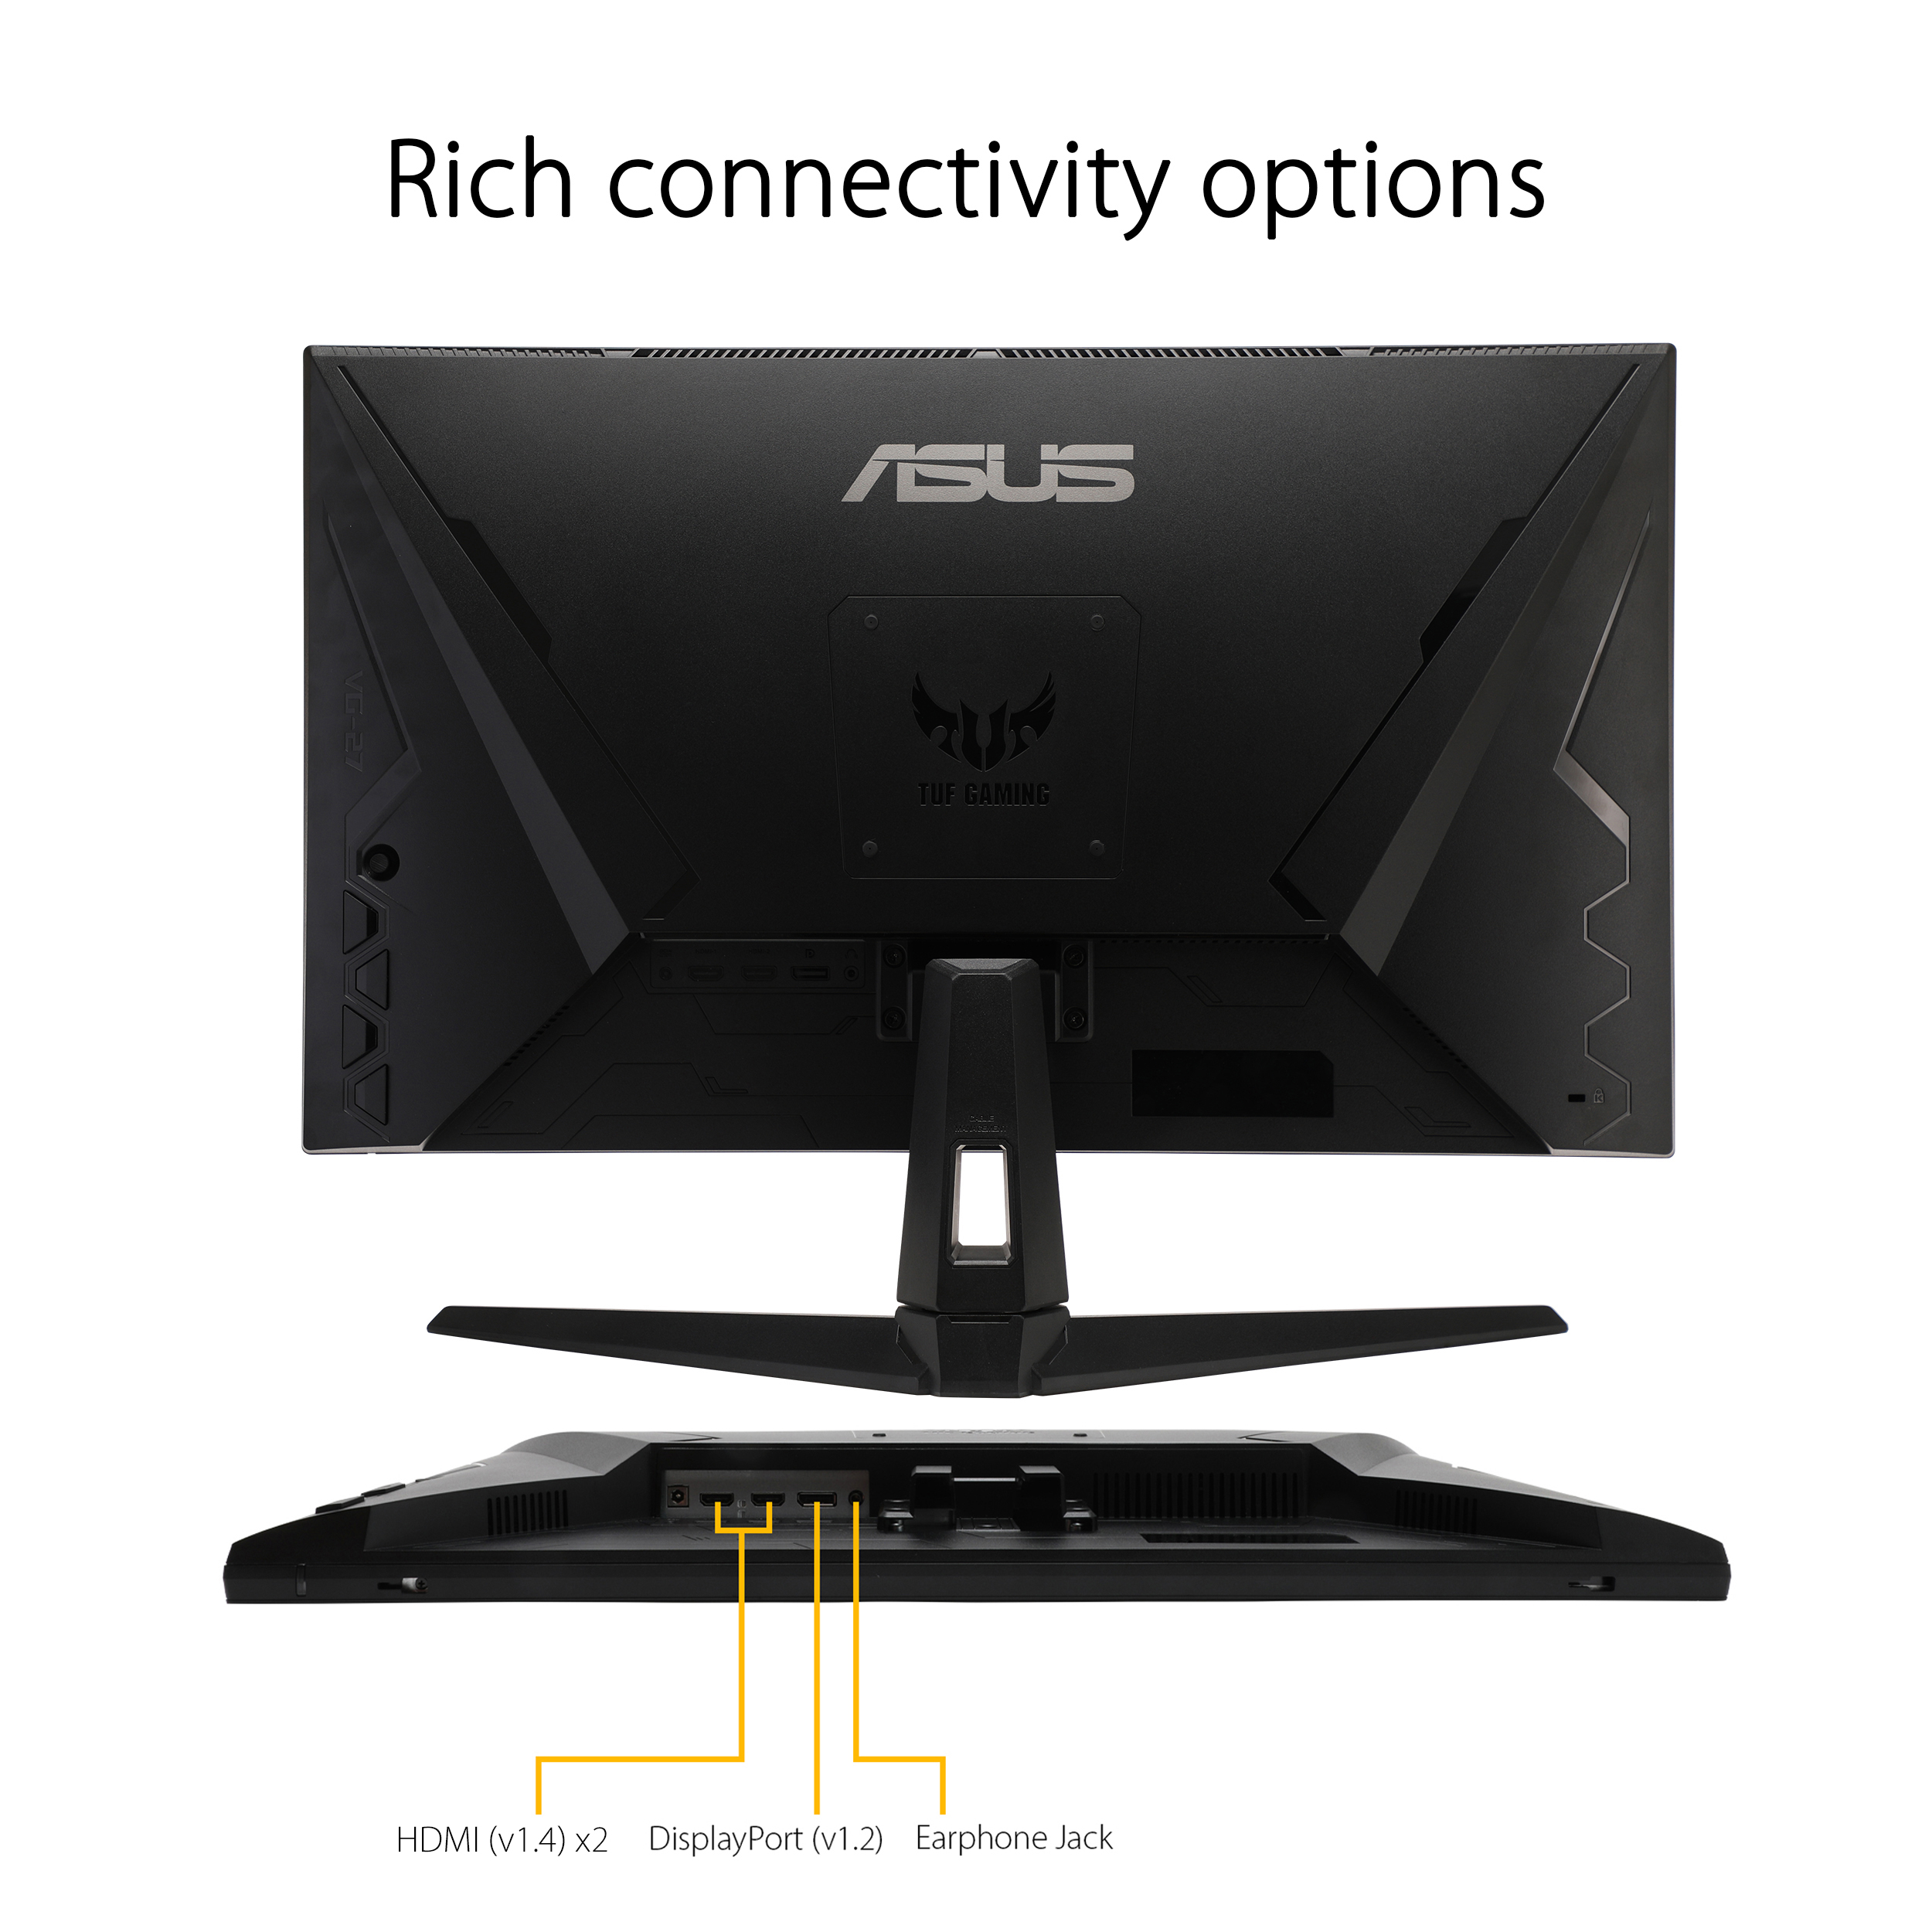 ASUS TUF Gaming 27” LED Gaming Monitor, 1080P Full HD, 165Hz (Supports 144Hz), IPS, 1ms - image 5 of 6